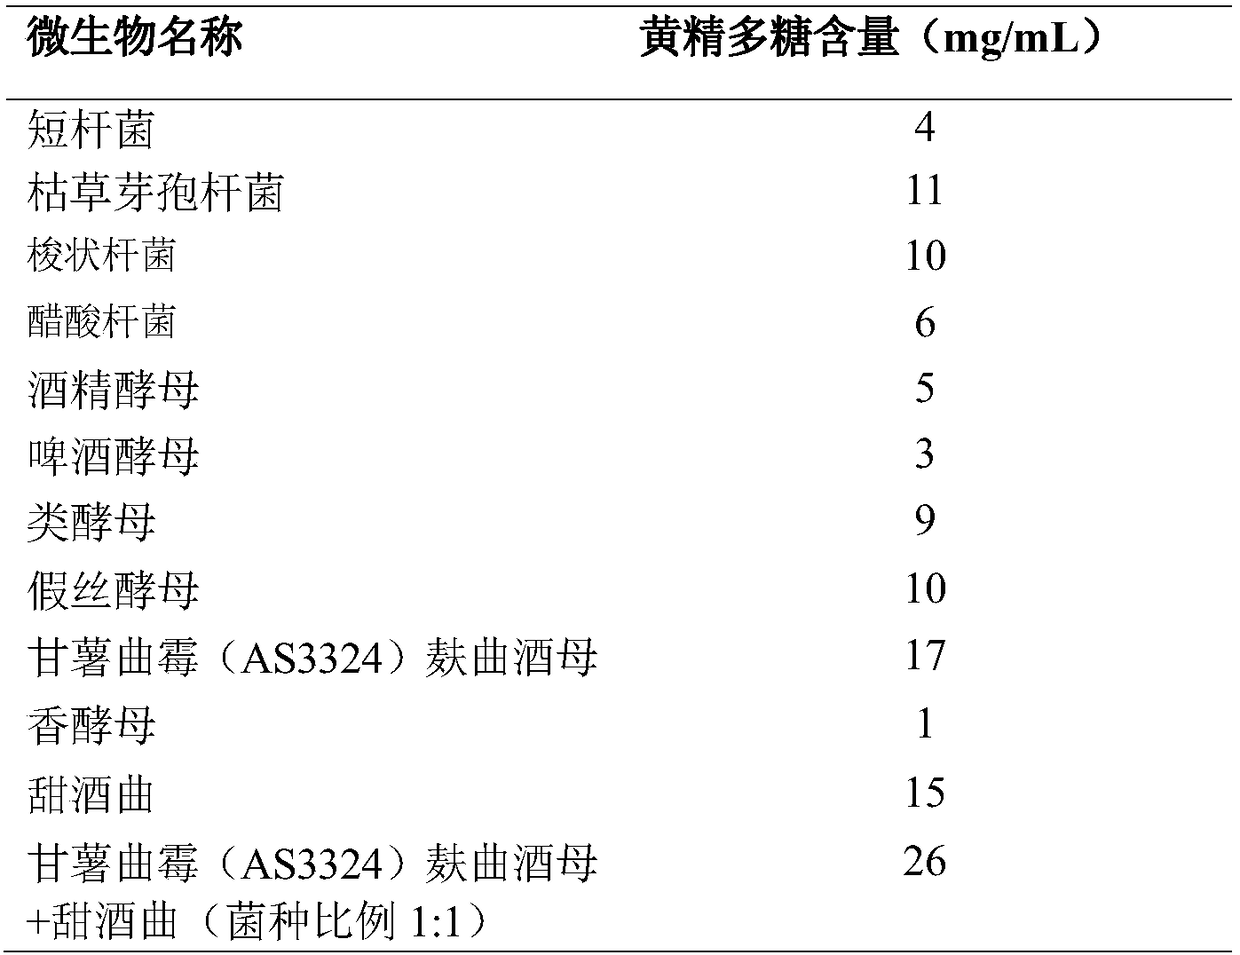 Candied manyflower solomonseal rhizome for treating chloasma and preparation method thereof